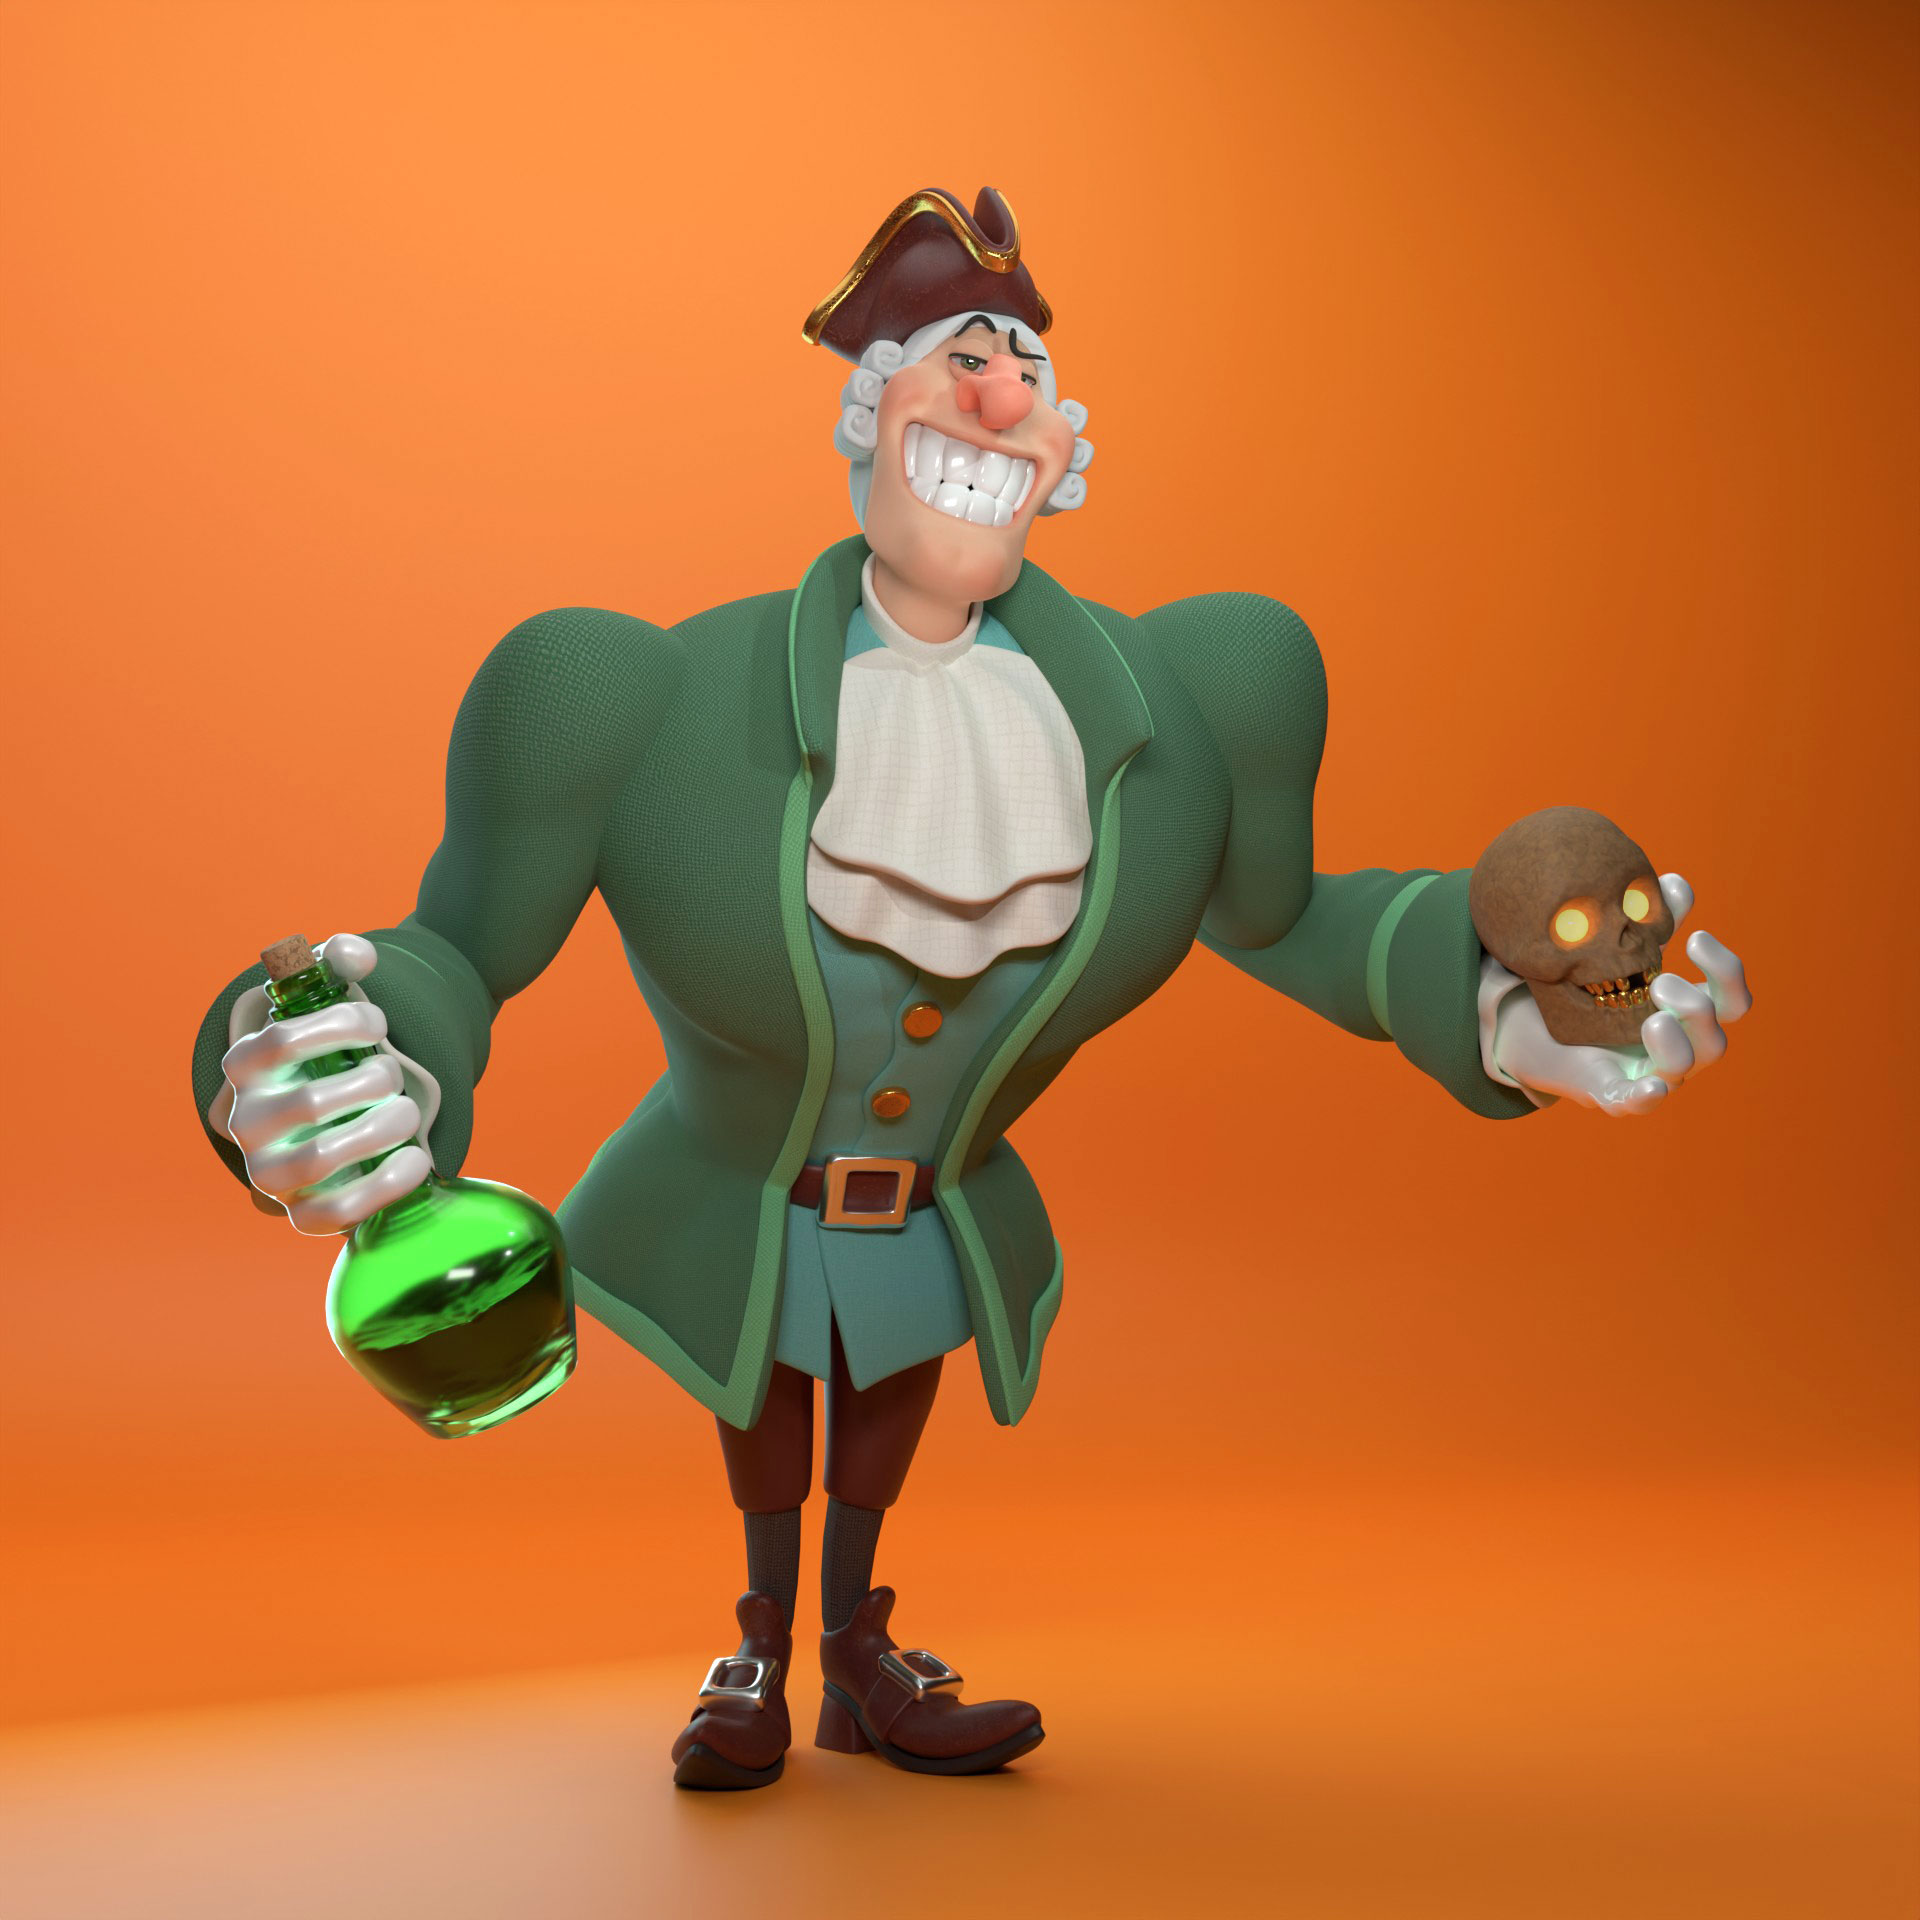 Famous Cartoon Characters - Finished Projects - Blender Artists Community